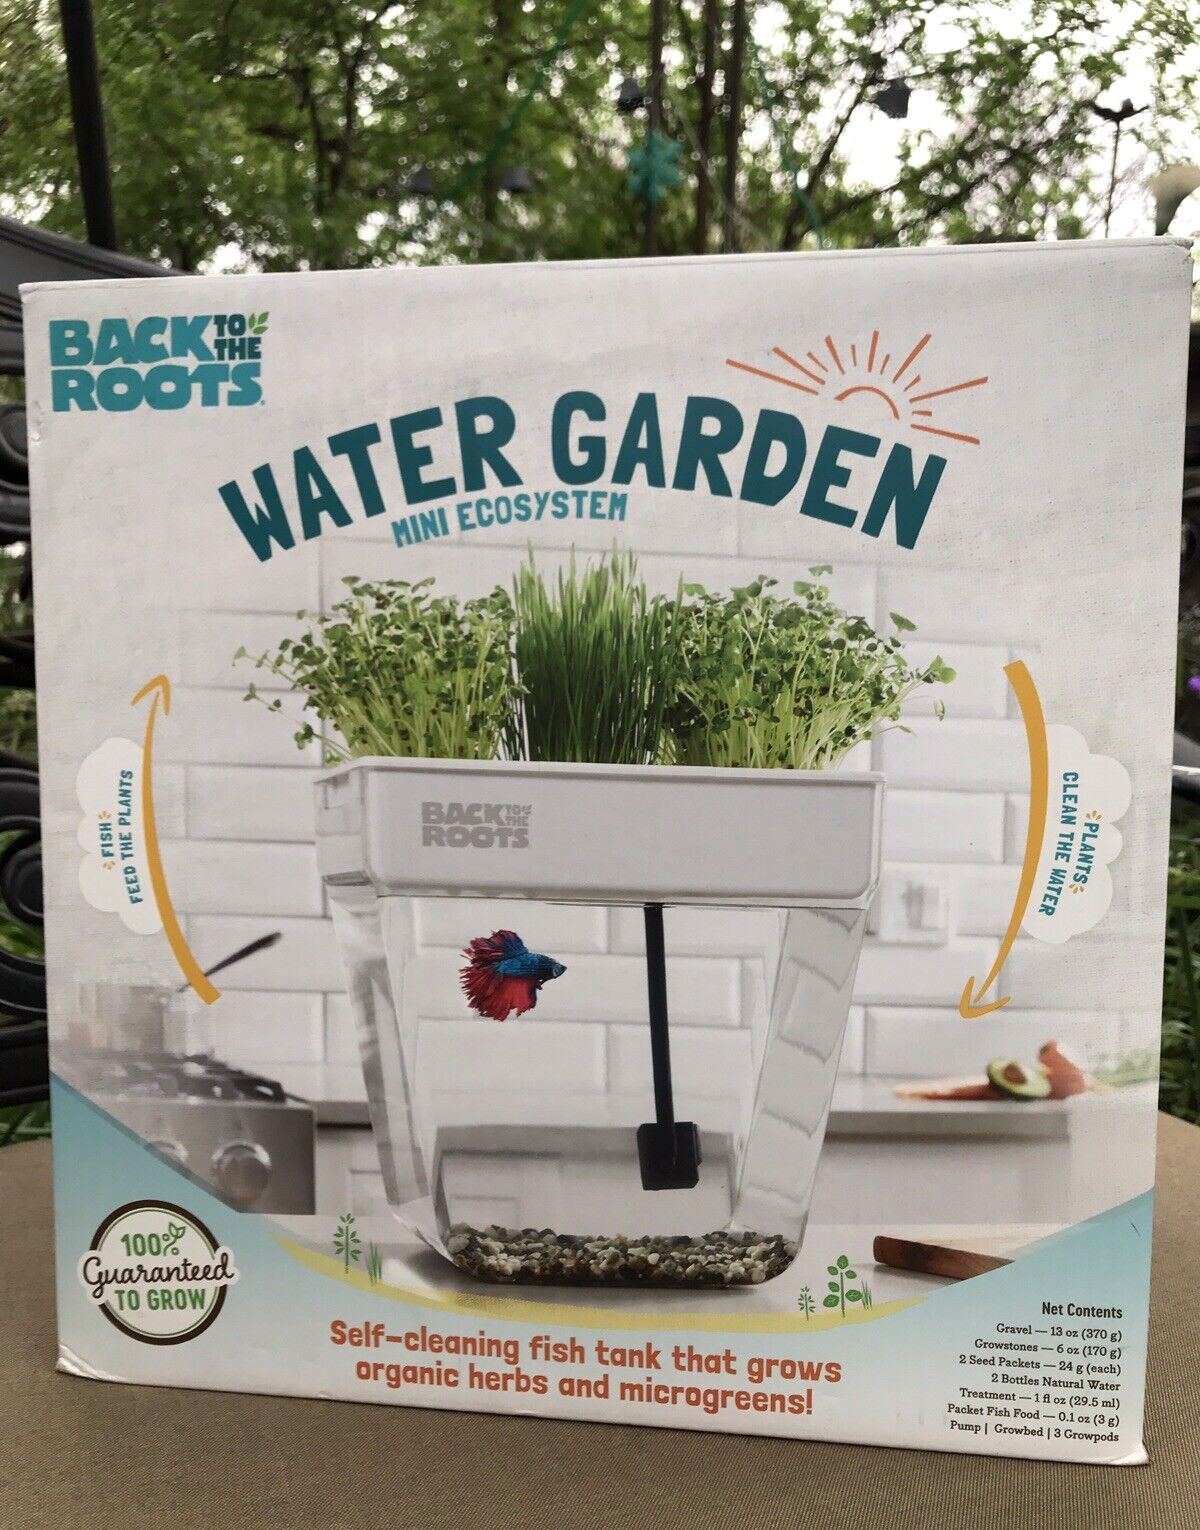 Back to the Roots Water Garden Self-Cleaning Fish Tank/Mini Aquaponic Ecosystem 